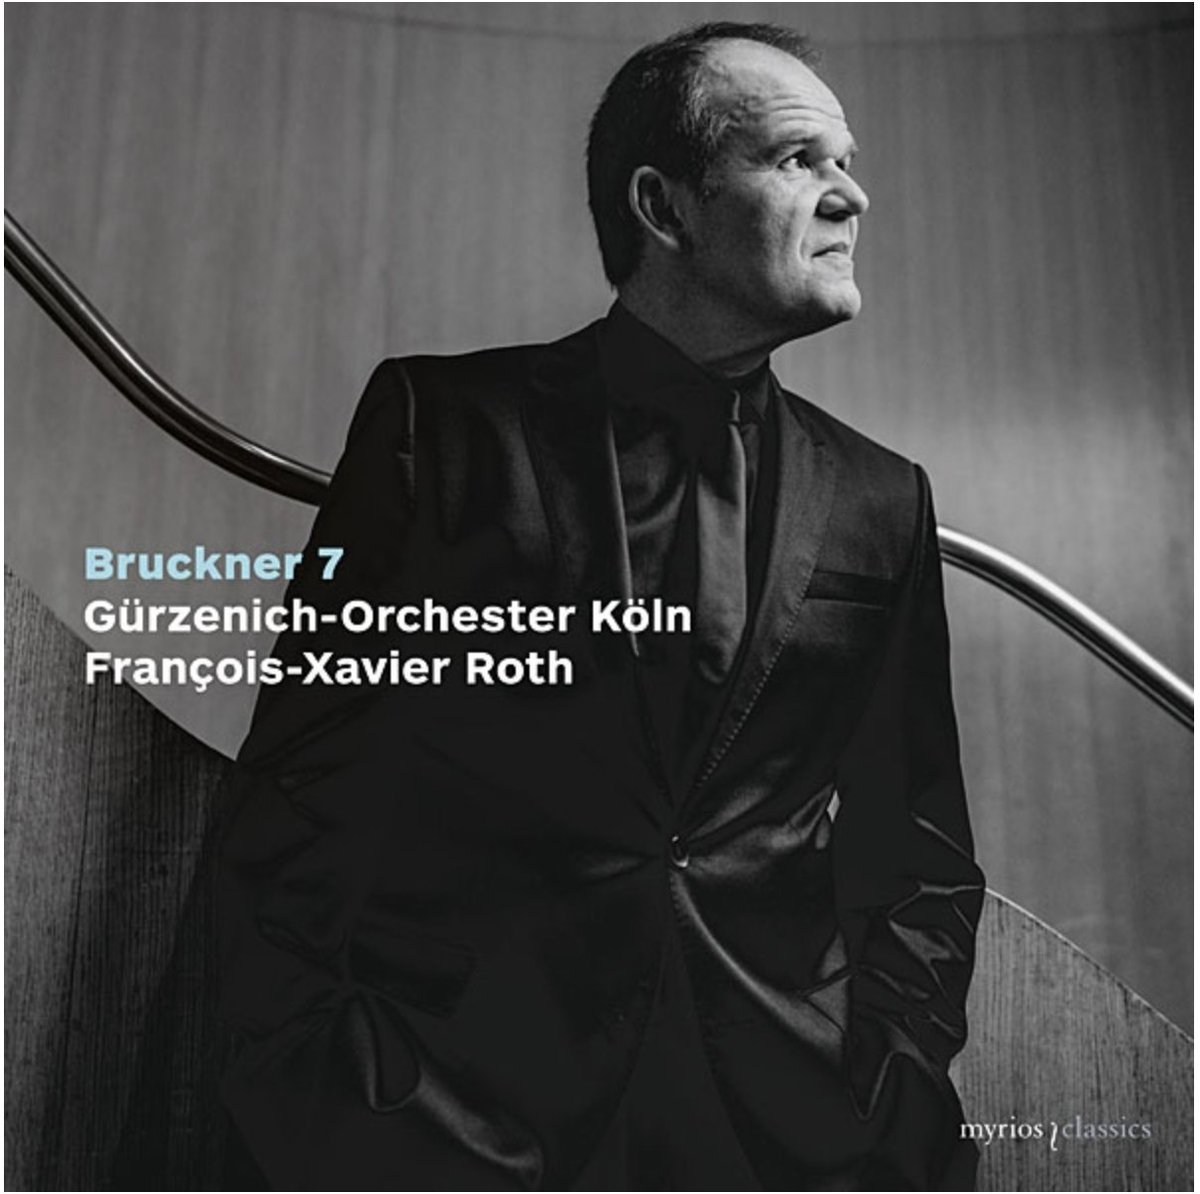 Bruckner Symphony No.7 @fxrroth 'Bruckner's most accessible symphony, has proved elusive on record. François-Xavier Roth gets it right.' ⭐⭐⭐⭐⭐ @Stereophile bit.ly/3y2r2g3 @myriosclassics